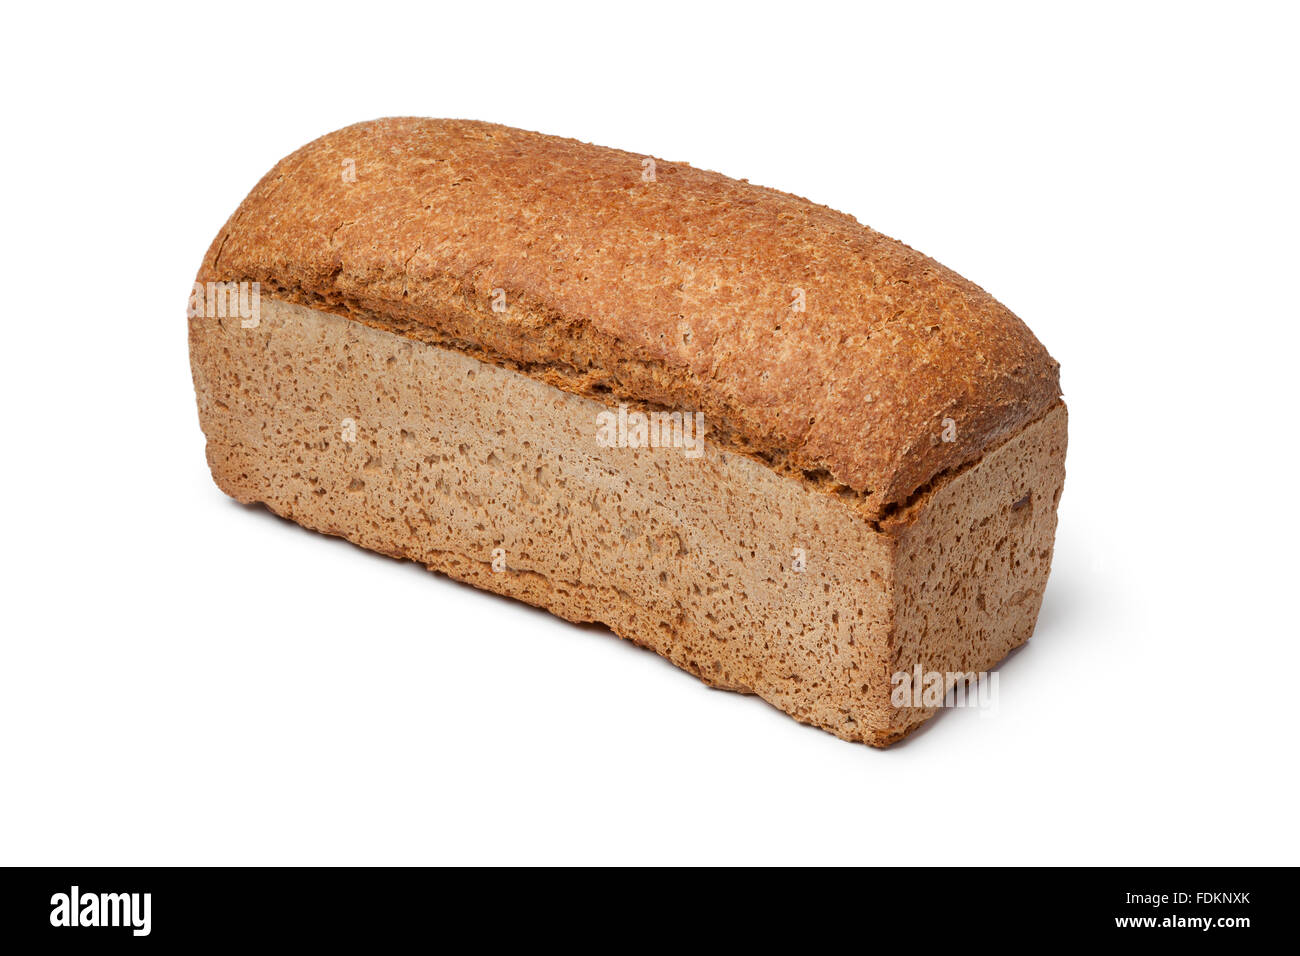 Whole loaf of spelt bread on white background Stock Photo